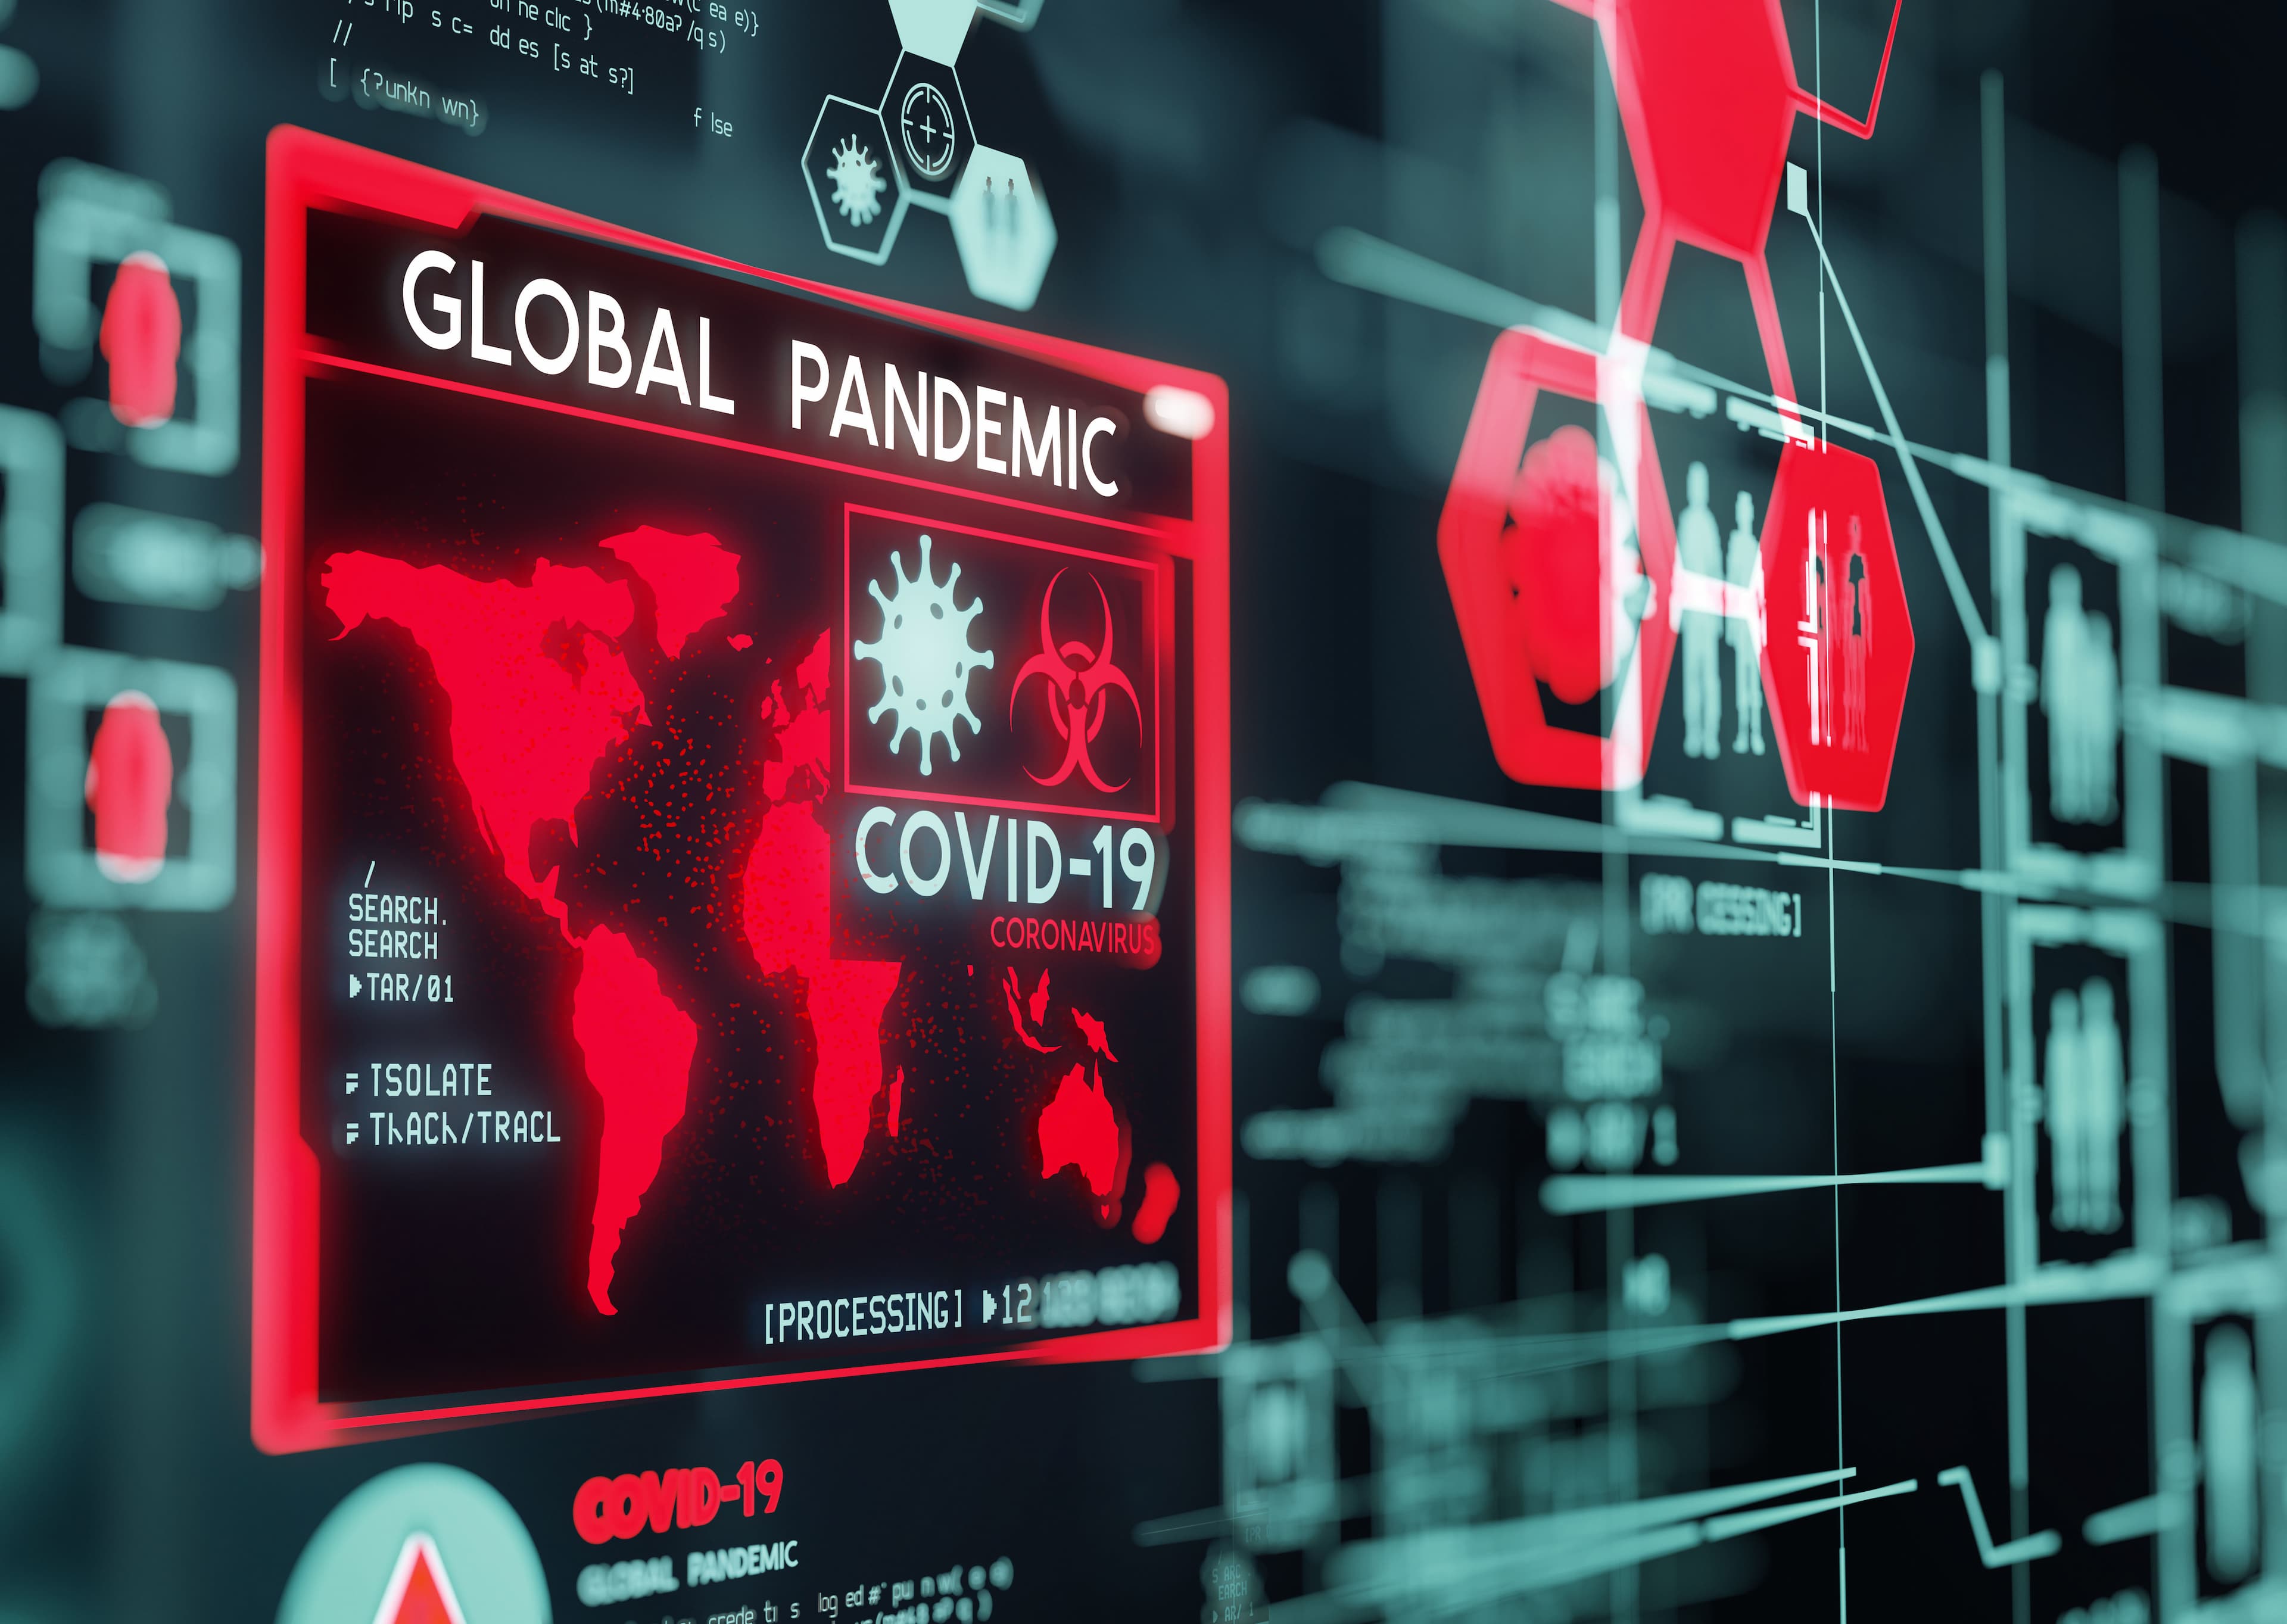 Security Lessons from the Pandemic